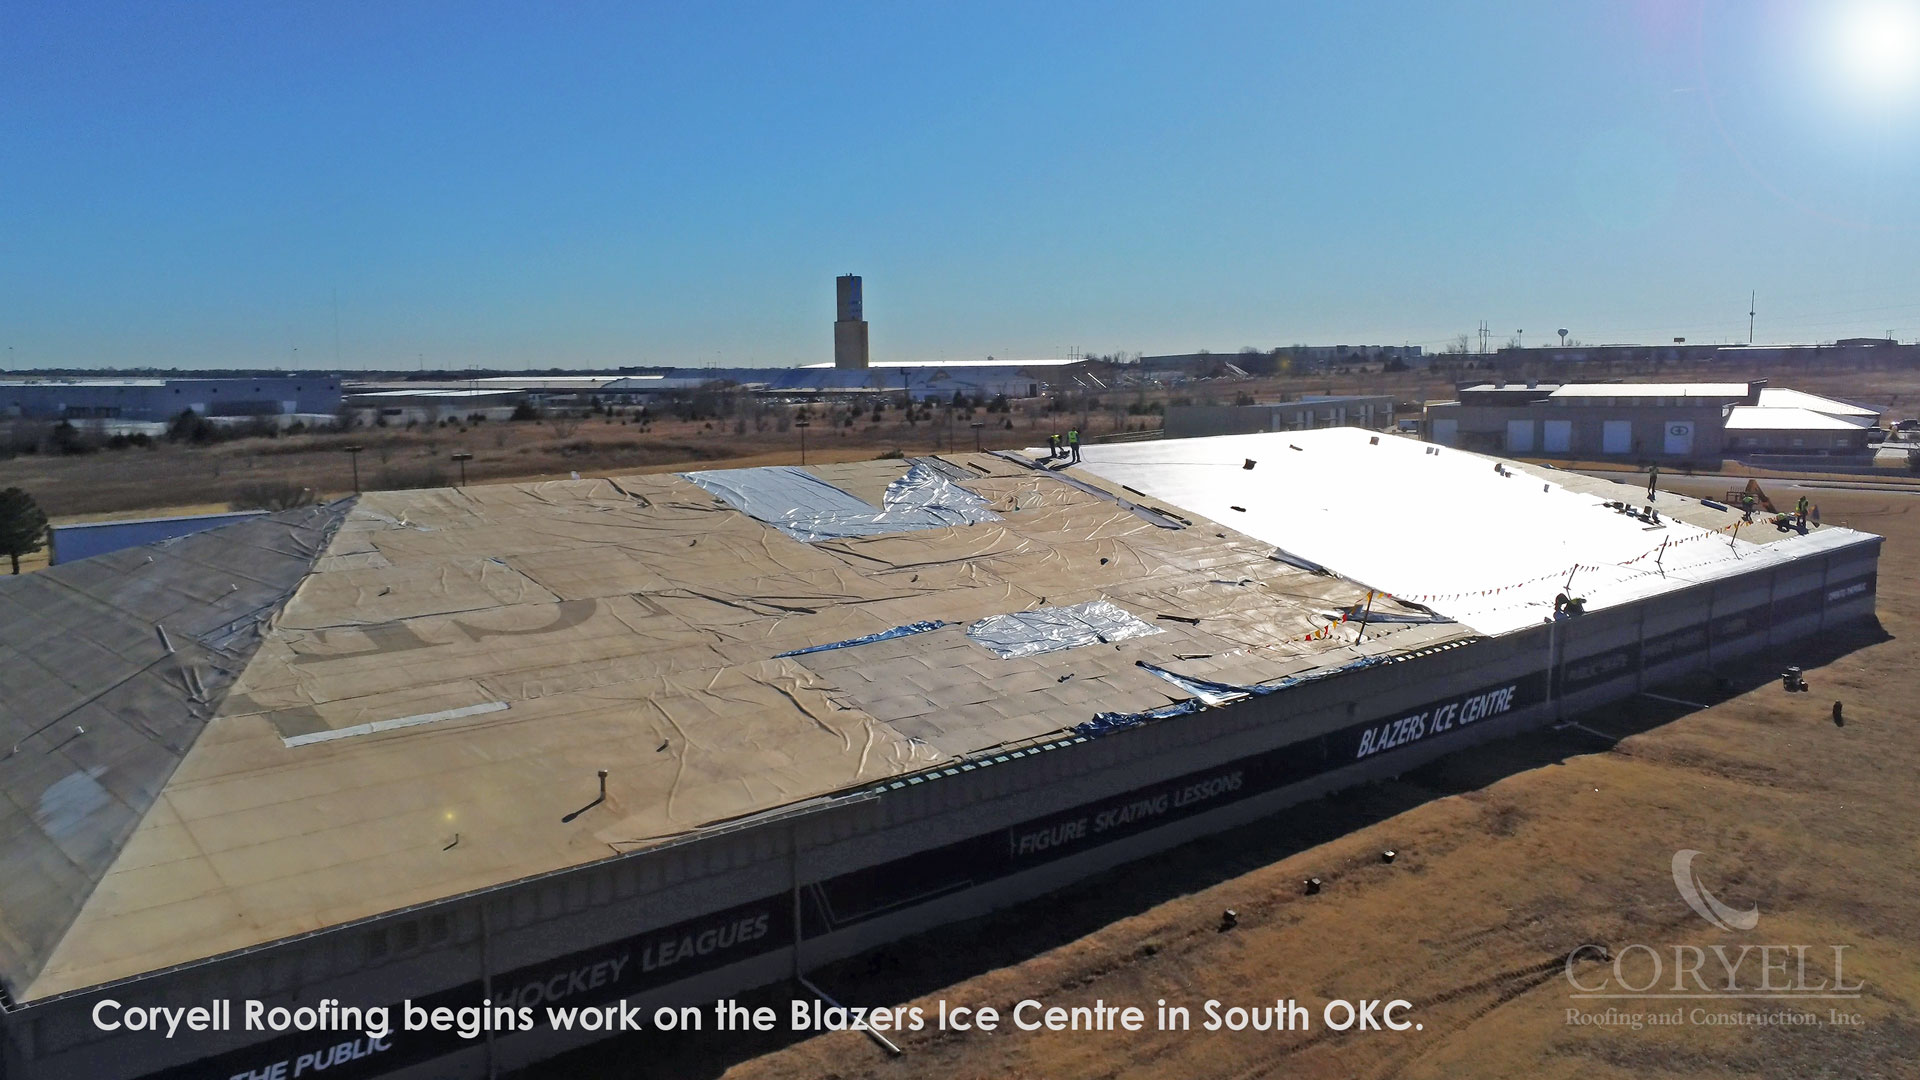 Coryell Roofing begins work on the Blazers Ice Centre in South OKC.